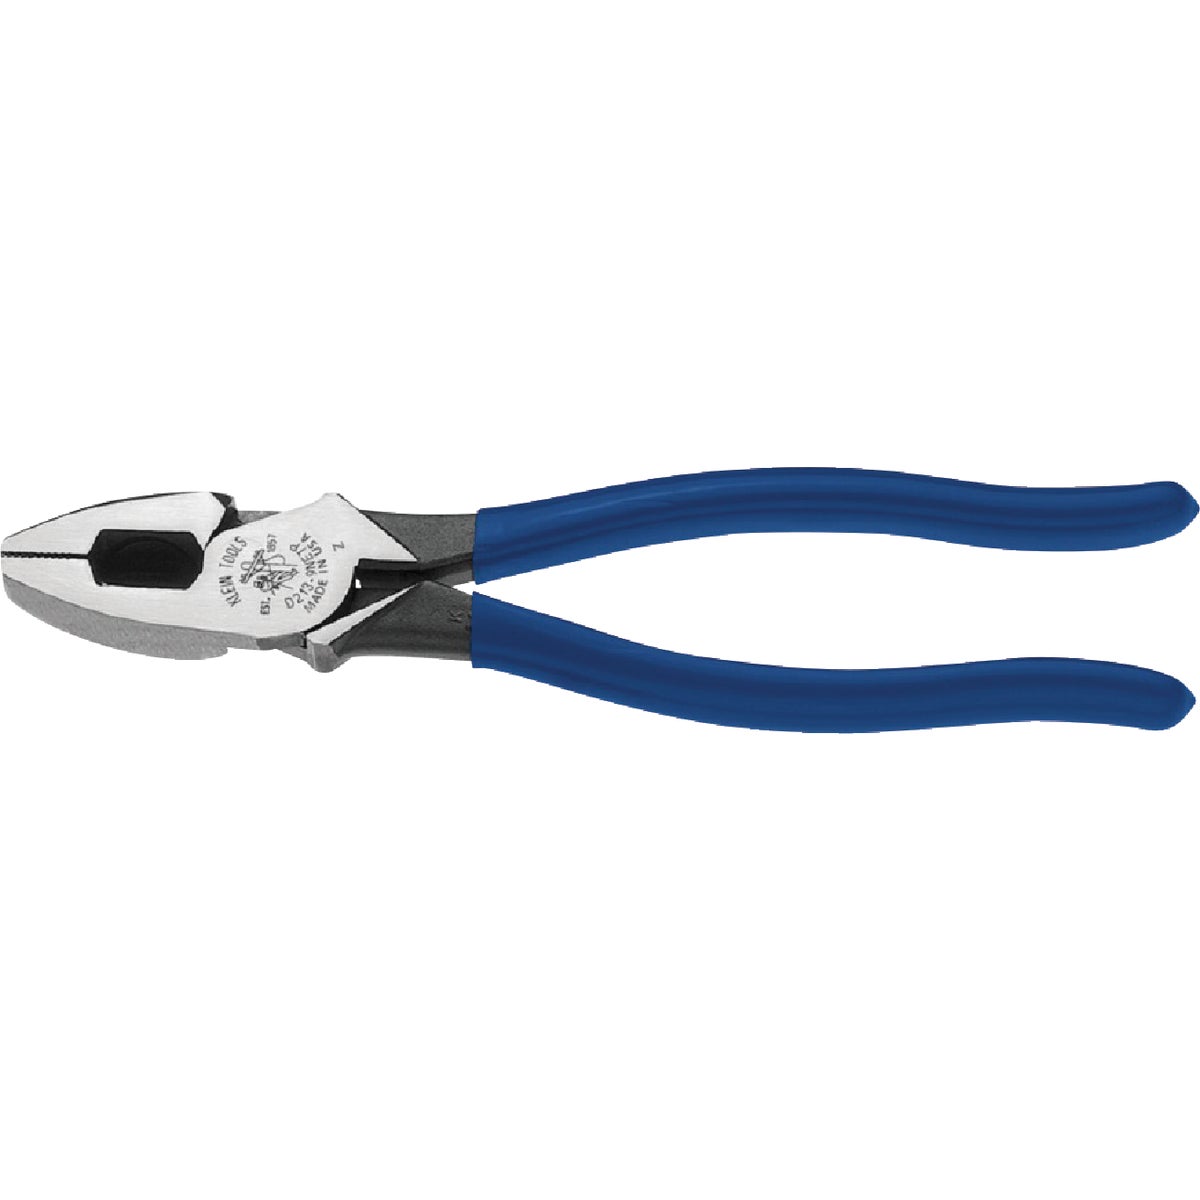 Item 317705, These high-leverage pliers were designed specifically for fish tape pulling